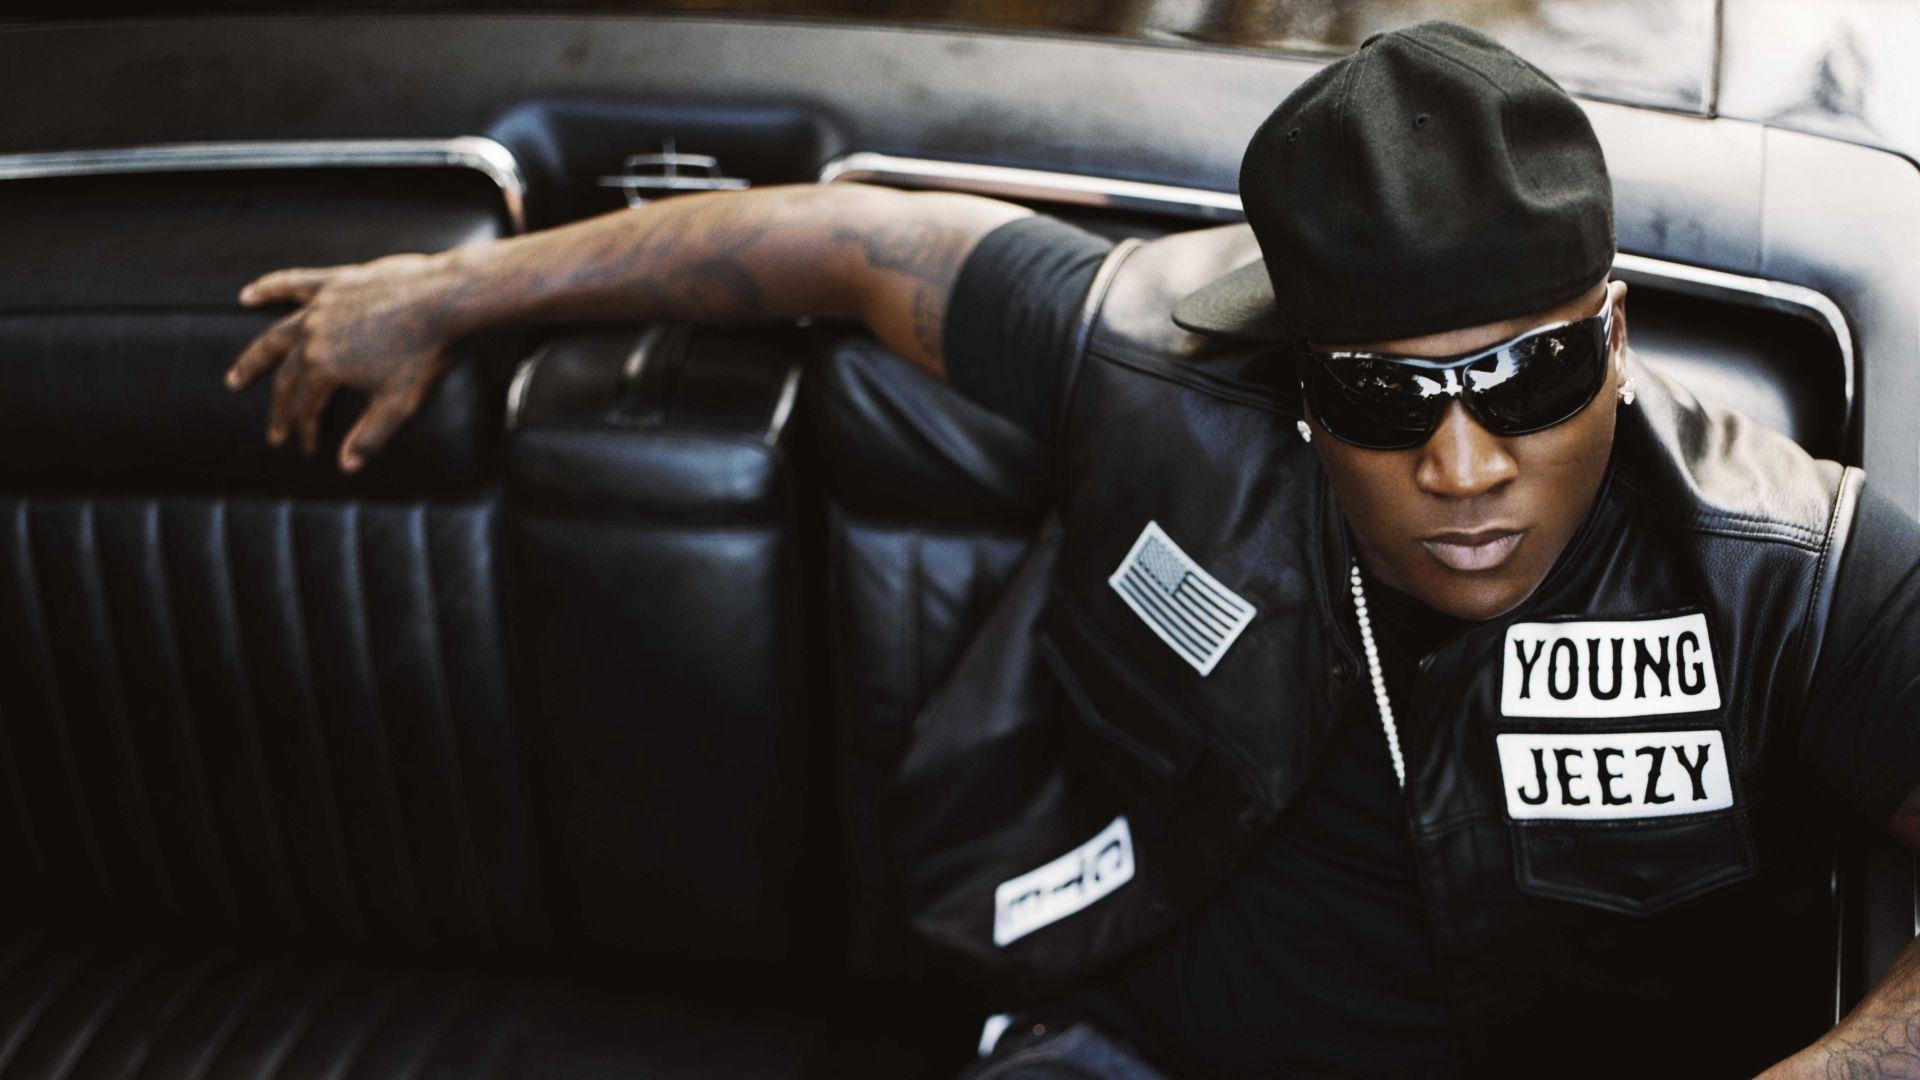 Download wallpaper 1920x1080 young jeezy, cabin, car, tattoo